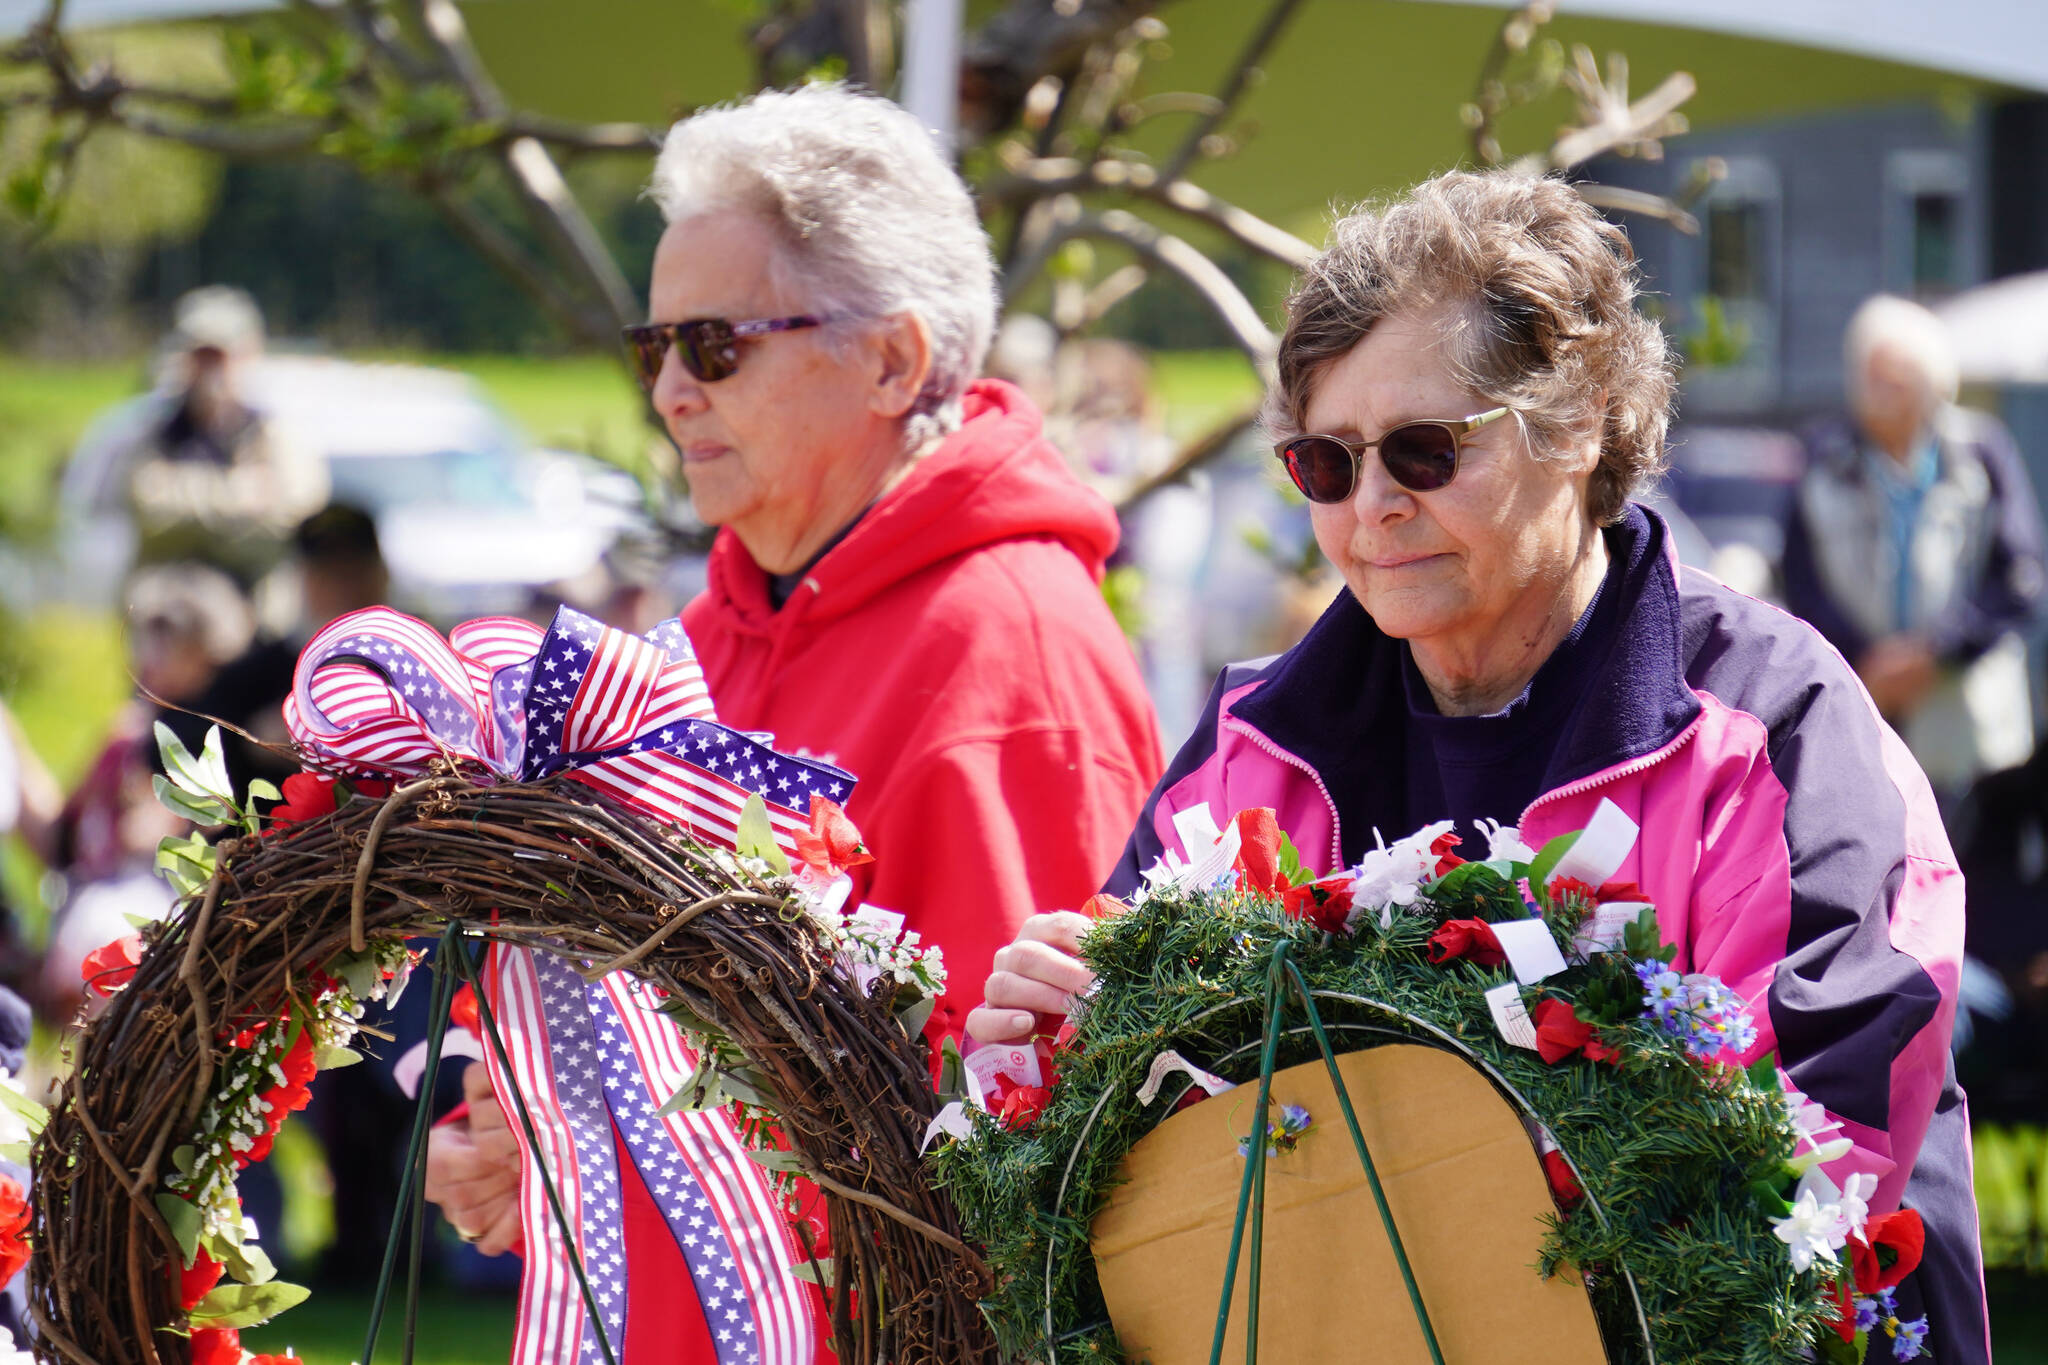 Attendees affix poppies to wreaths during a Memorial Day ceremony on Monday, May 29, 2023, at Leif Hanson Memorial Park in Kenai, Alaska. (Jake Dye/Peninsula Clarion)